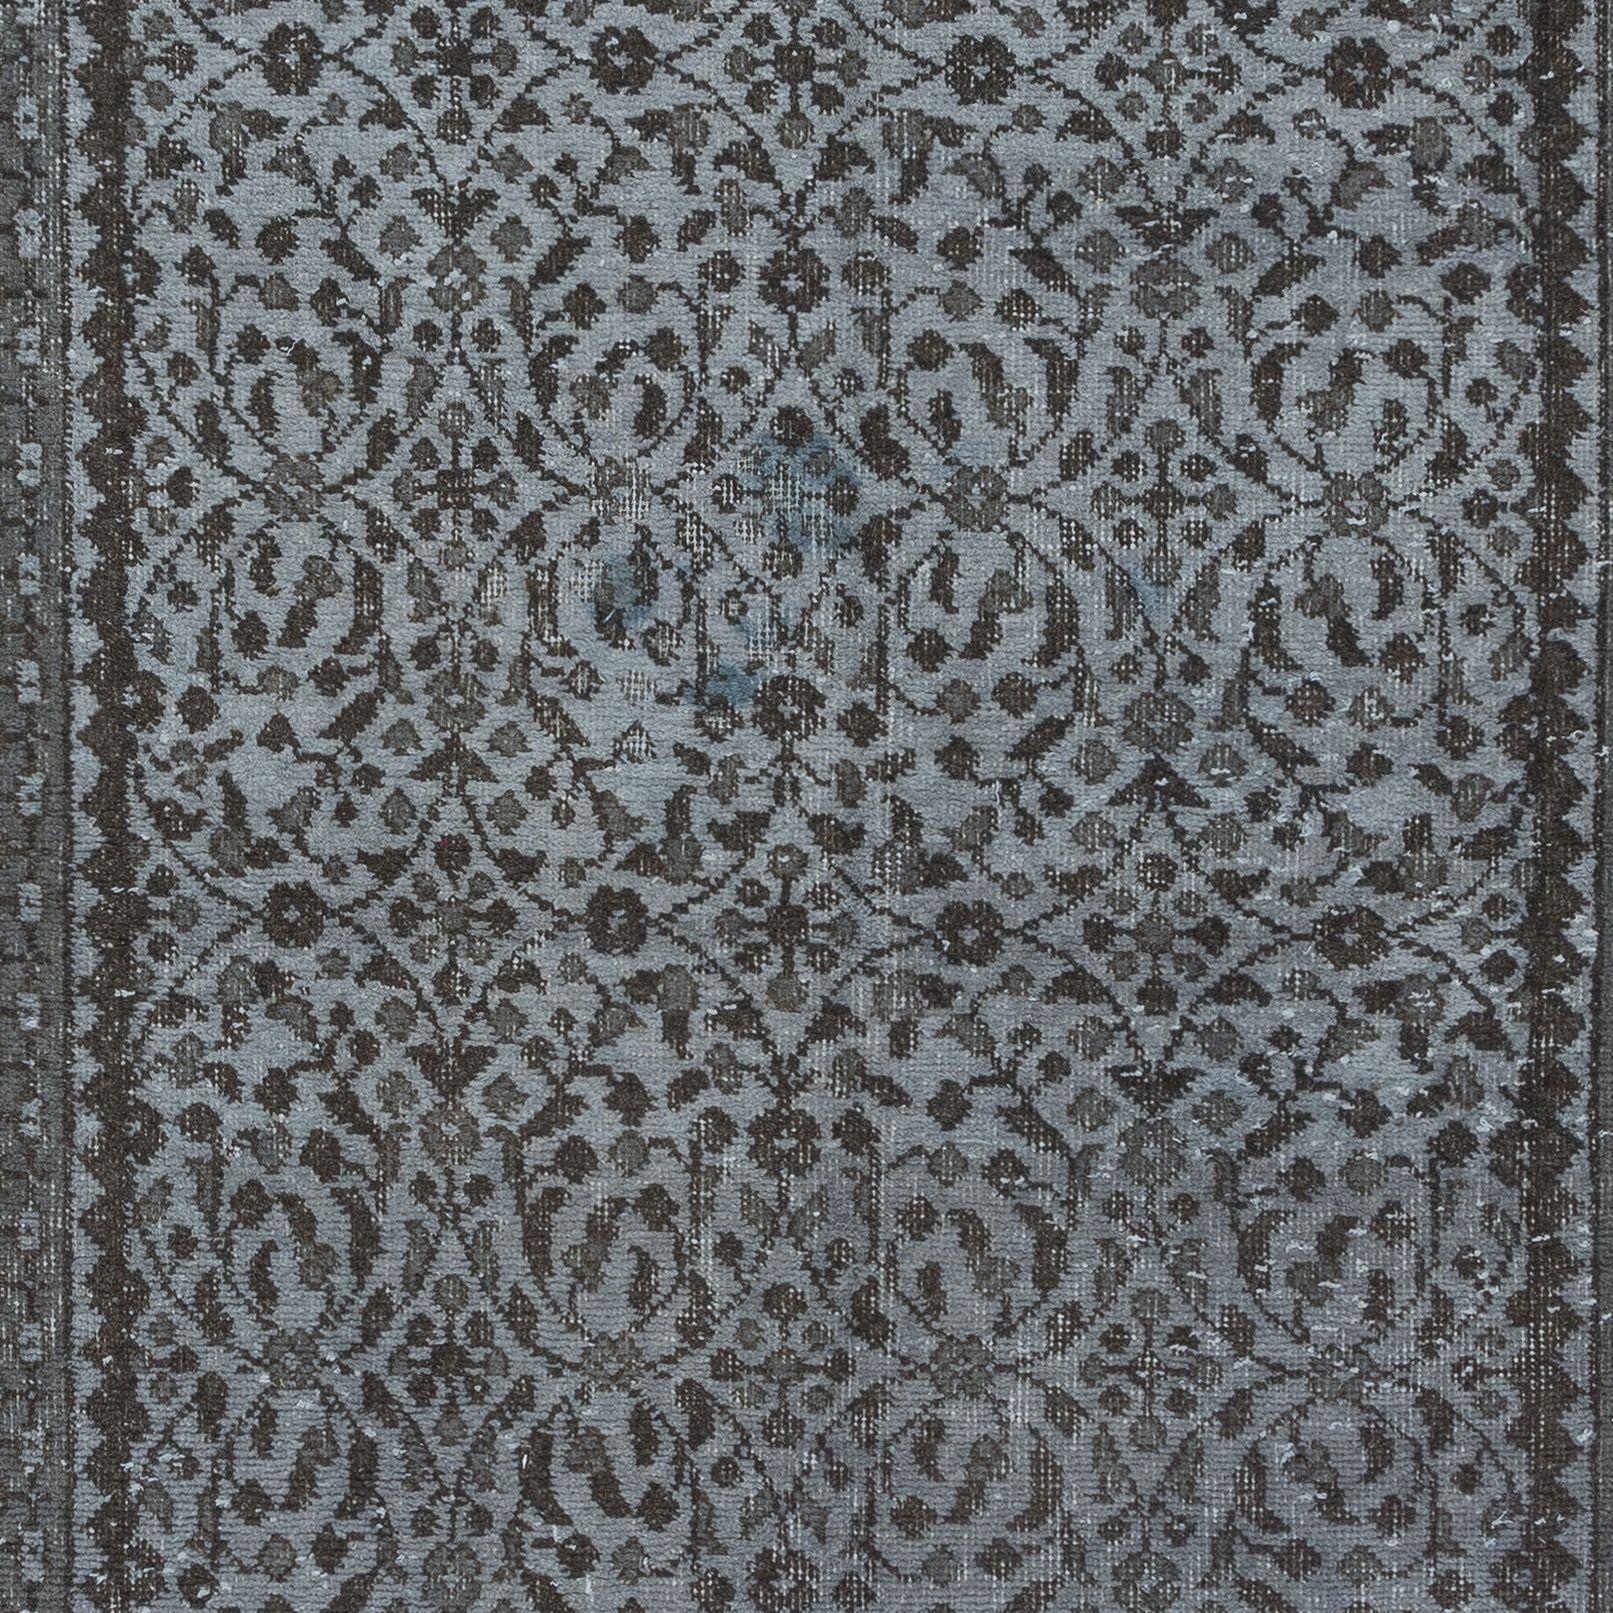 Turkish 4x7 Ft Small Handmade Rug with Botanical Design and Gray Background from Turkey For Sale